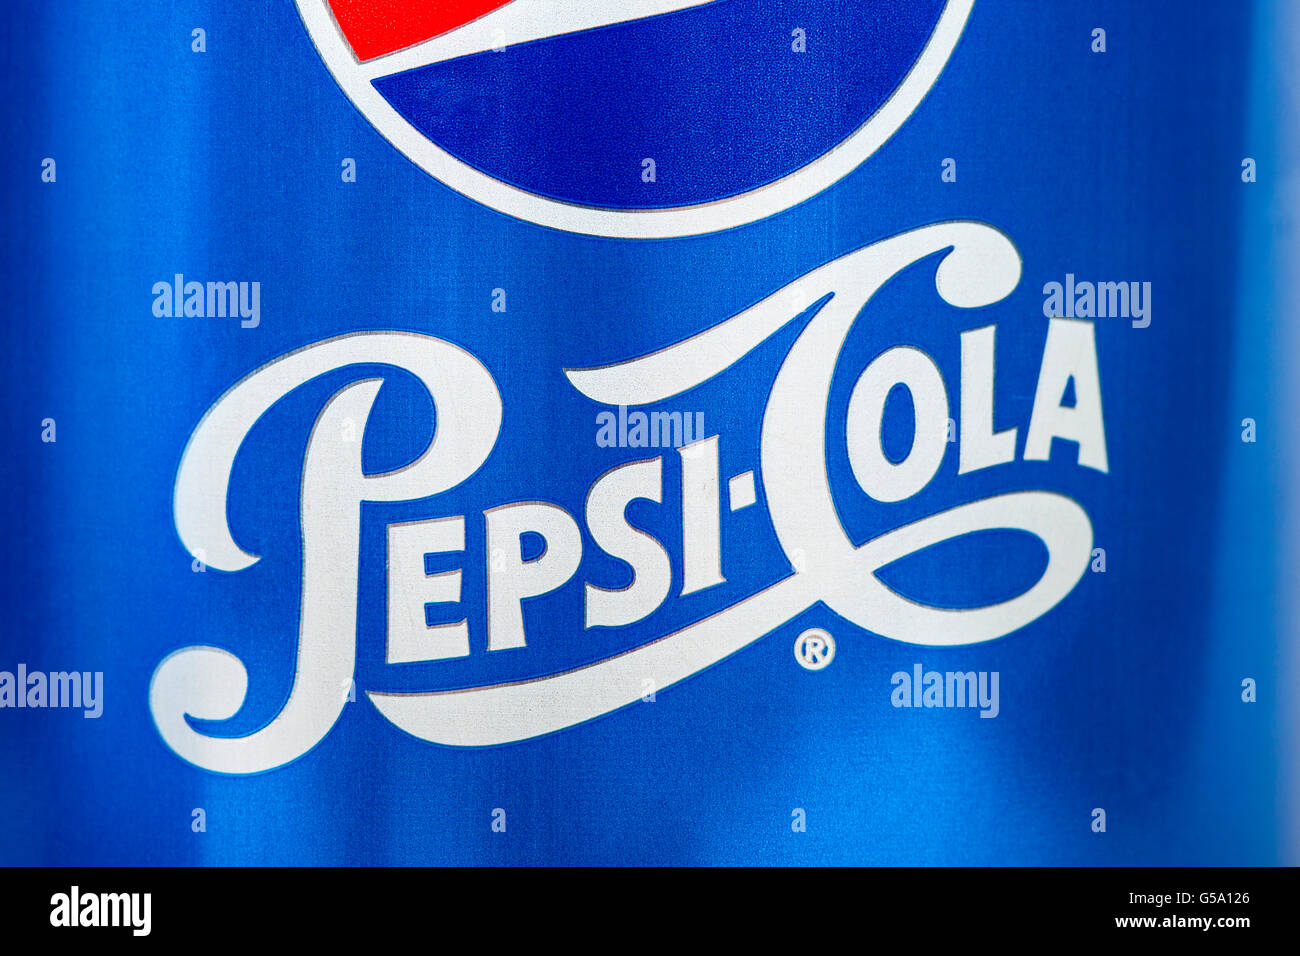 LONDON, UK - JUNE 16TH 2016: Close-up view of the Pepsi Cola logo, on 16th June 2016. The product is produced and manufactured b Stock Photo